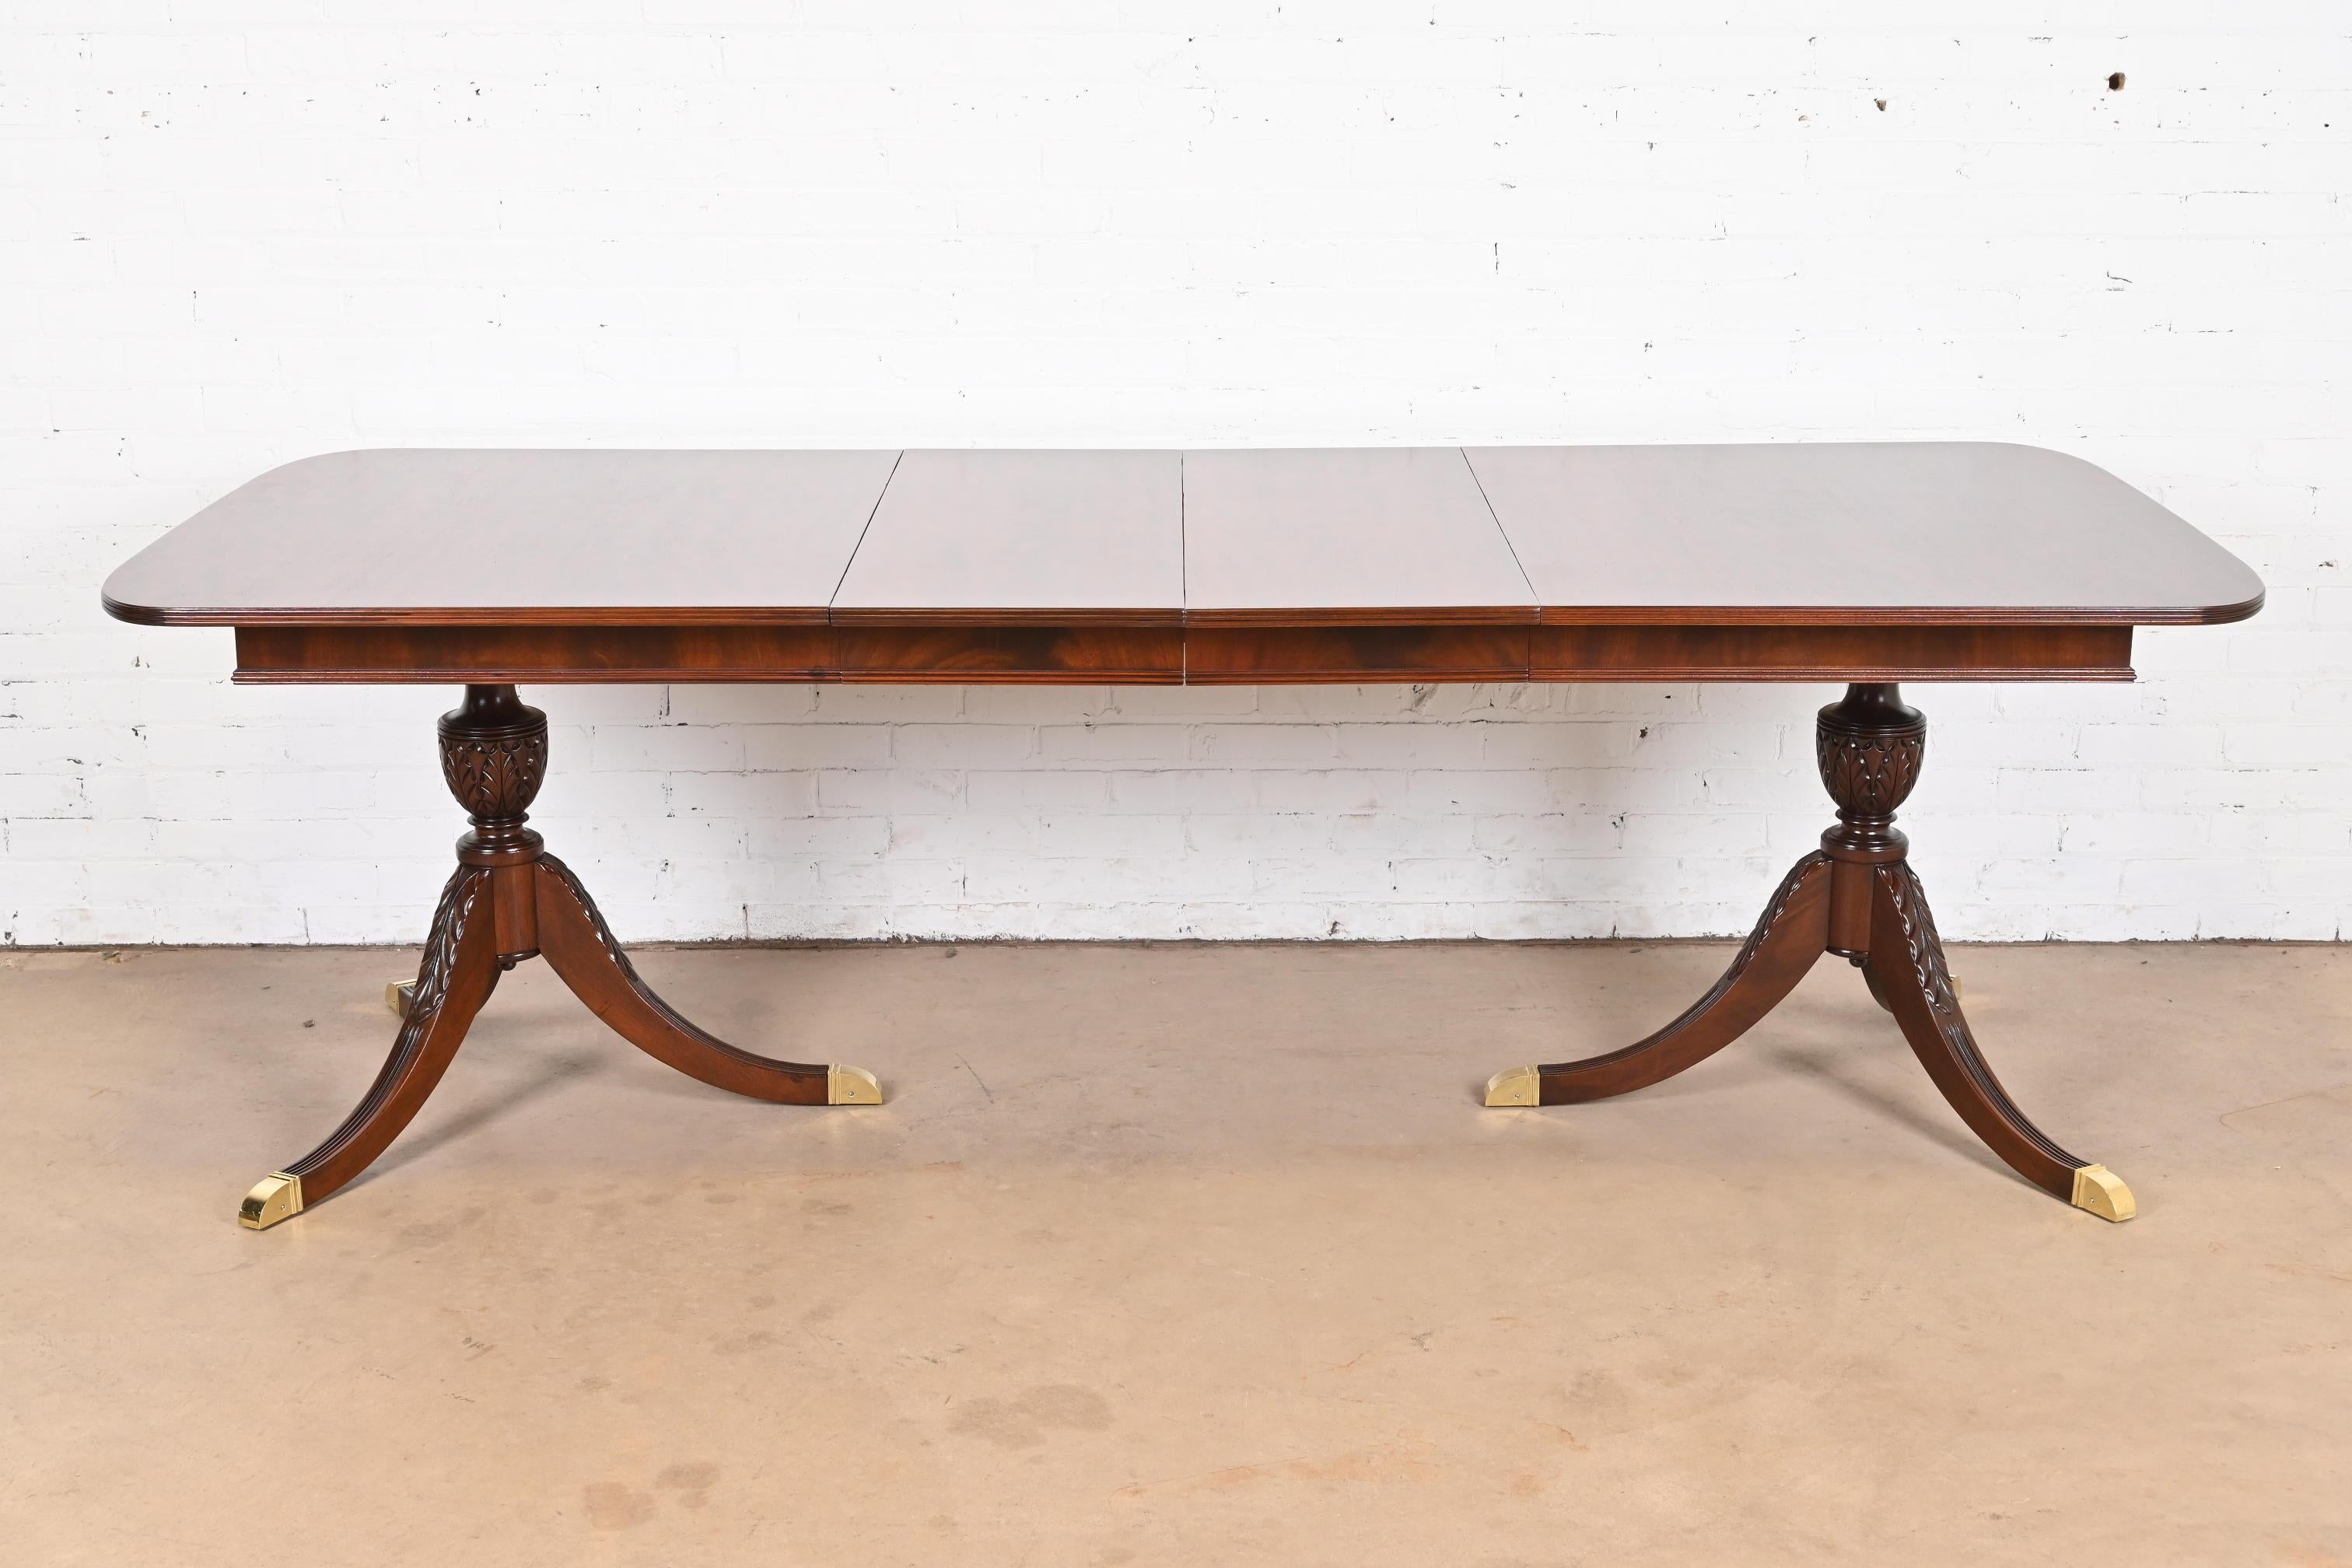 A gorgeous Georgian or Regency style double pedestal extension dining table

In the manner of Baker Furniture

USA, Circa 1980s

Beautiful mahogany, with carved solid mahogany pedestals, and brass-capped feet.

Measures: 66